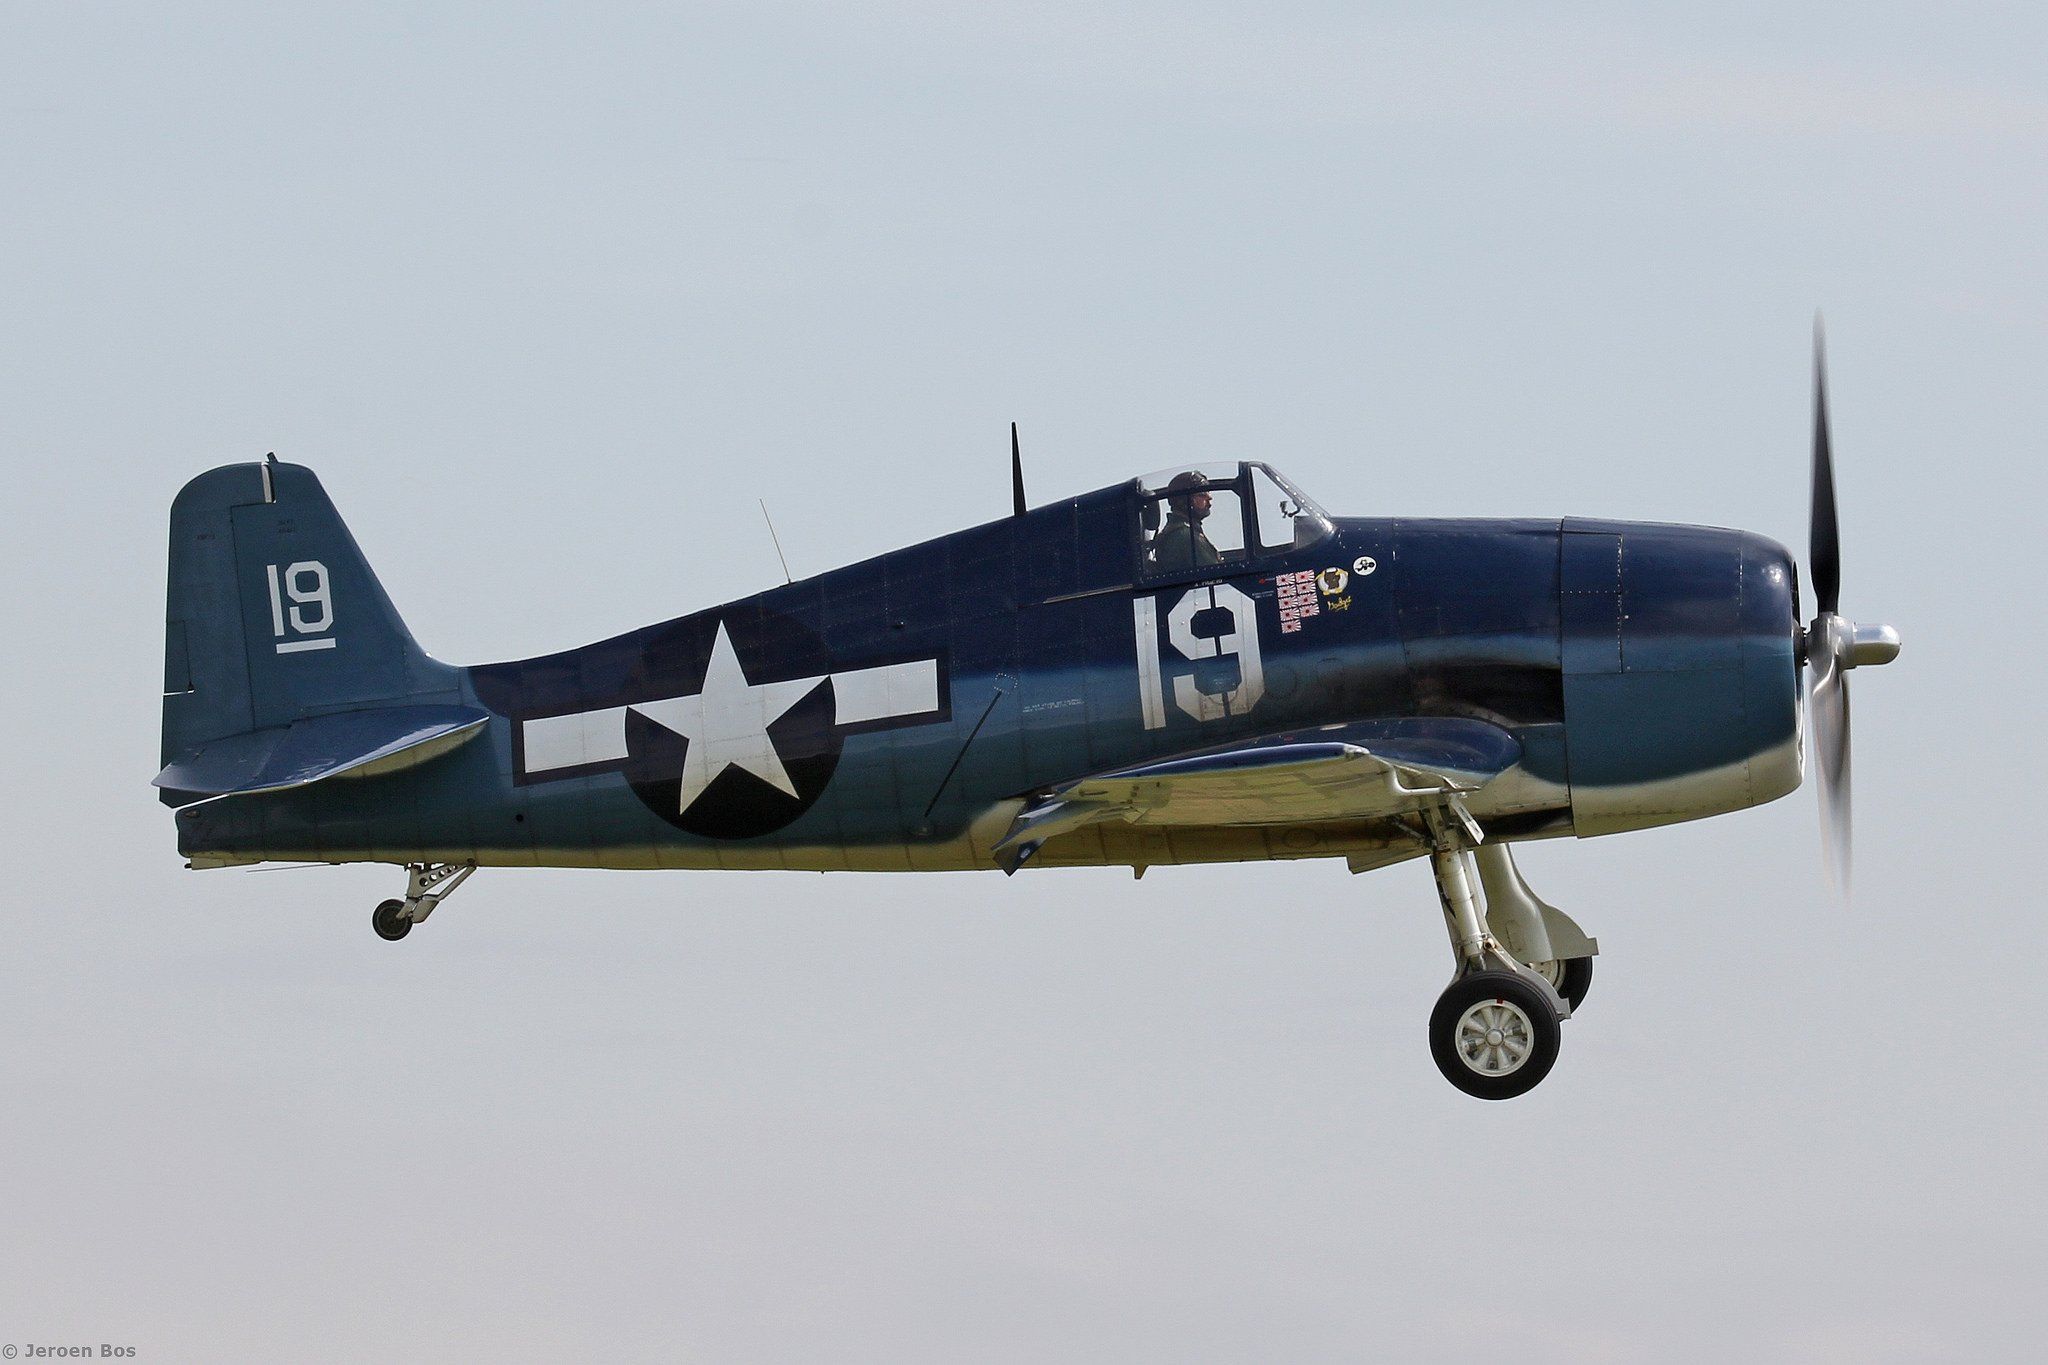 aeroplane, Aircraft, Airplanes, Airshow, American, Fighter, Flight, Flying, North, War, Grumman, F6f, Hellcat Wallpaper HD / Desktop and Mobile Background